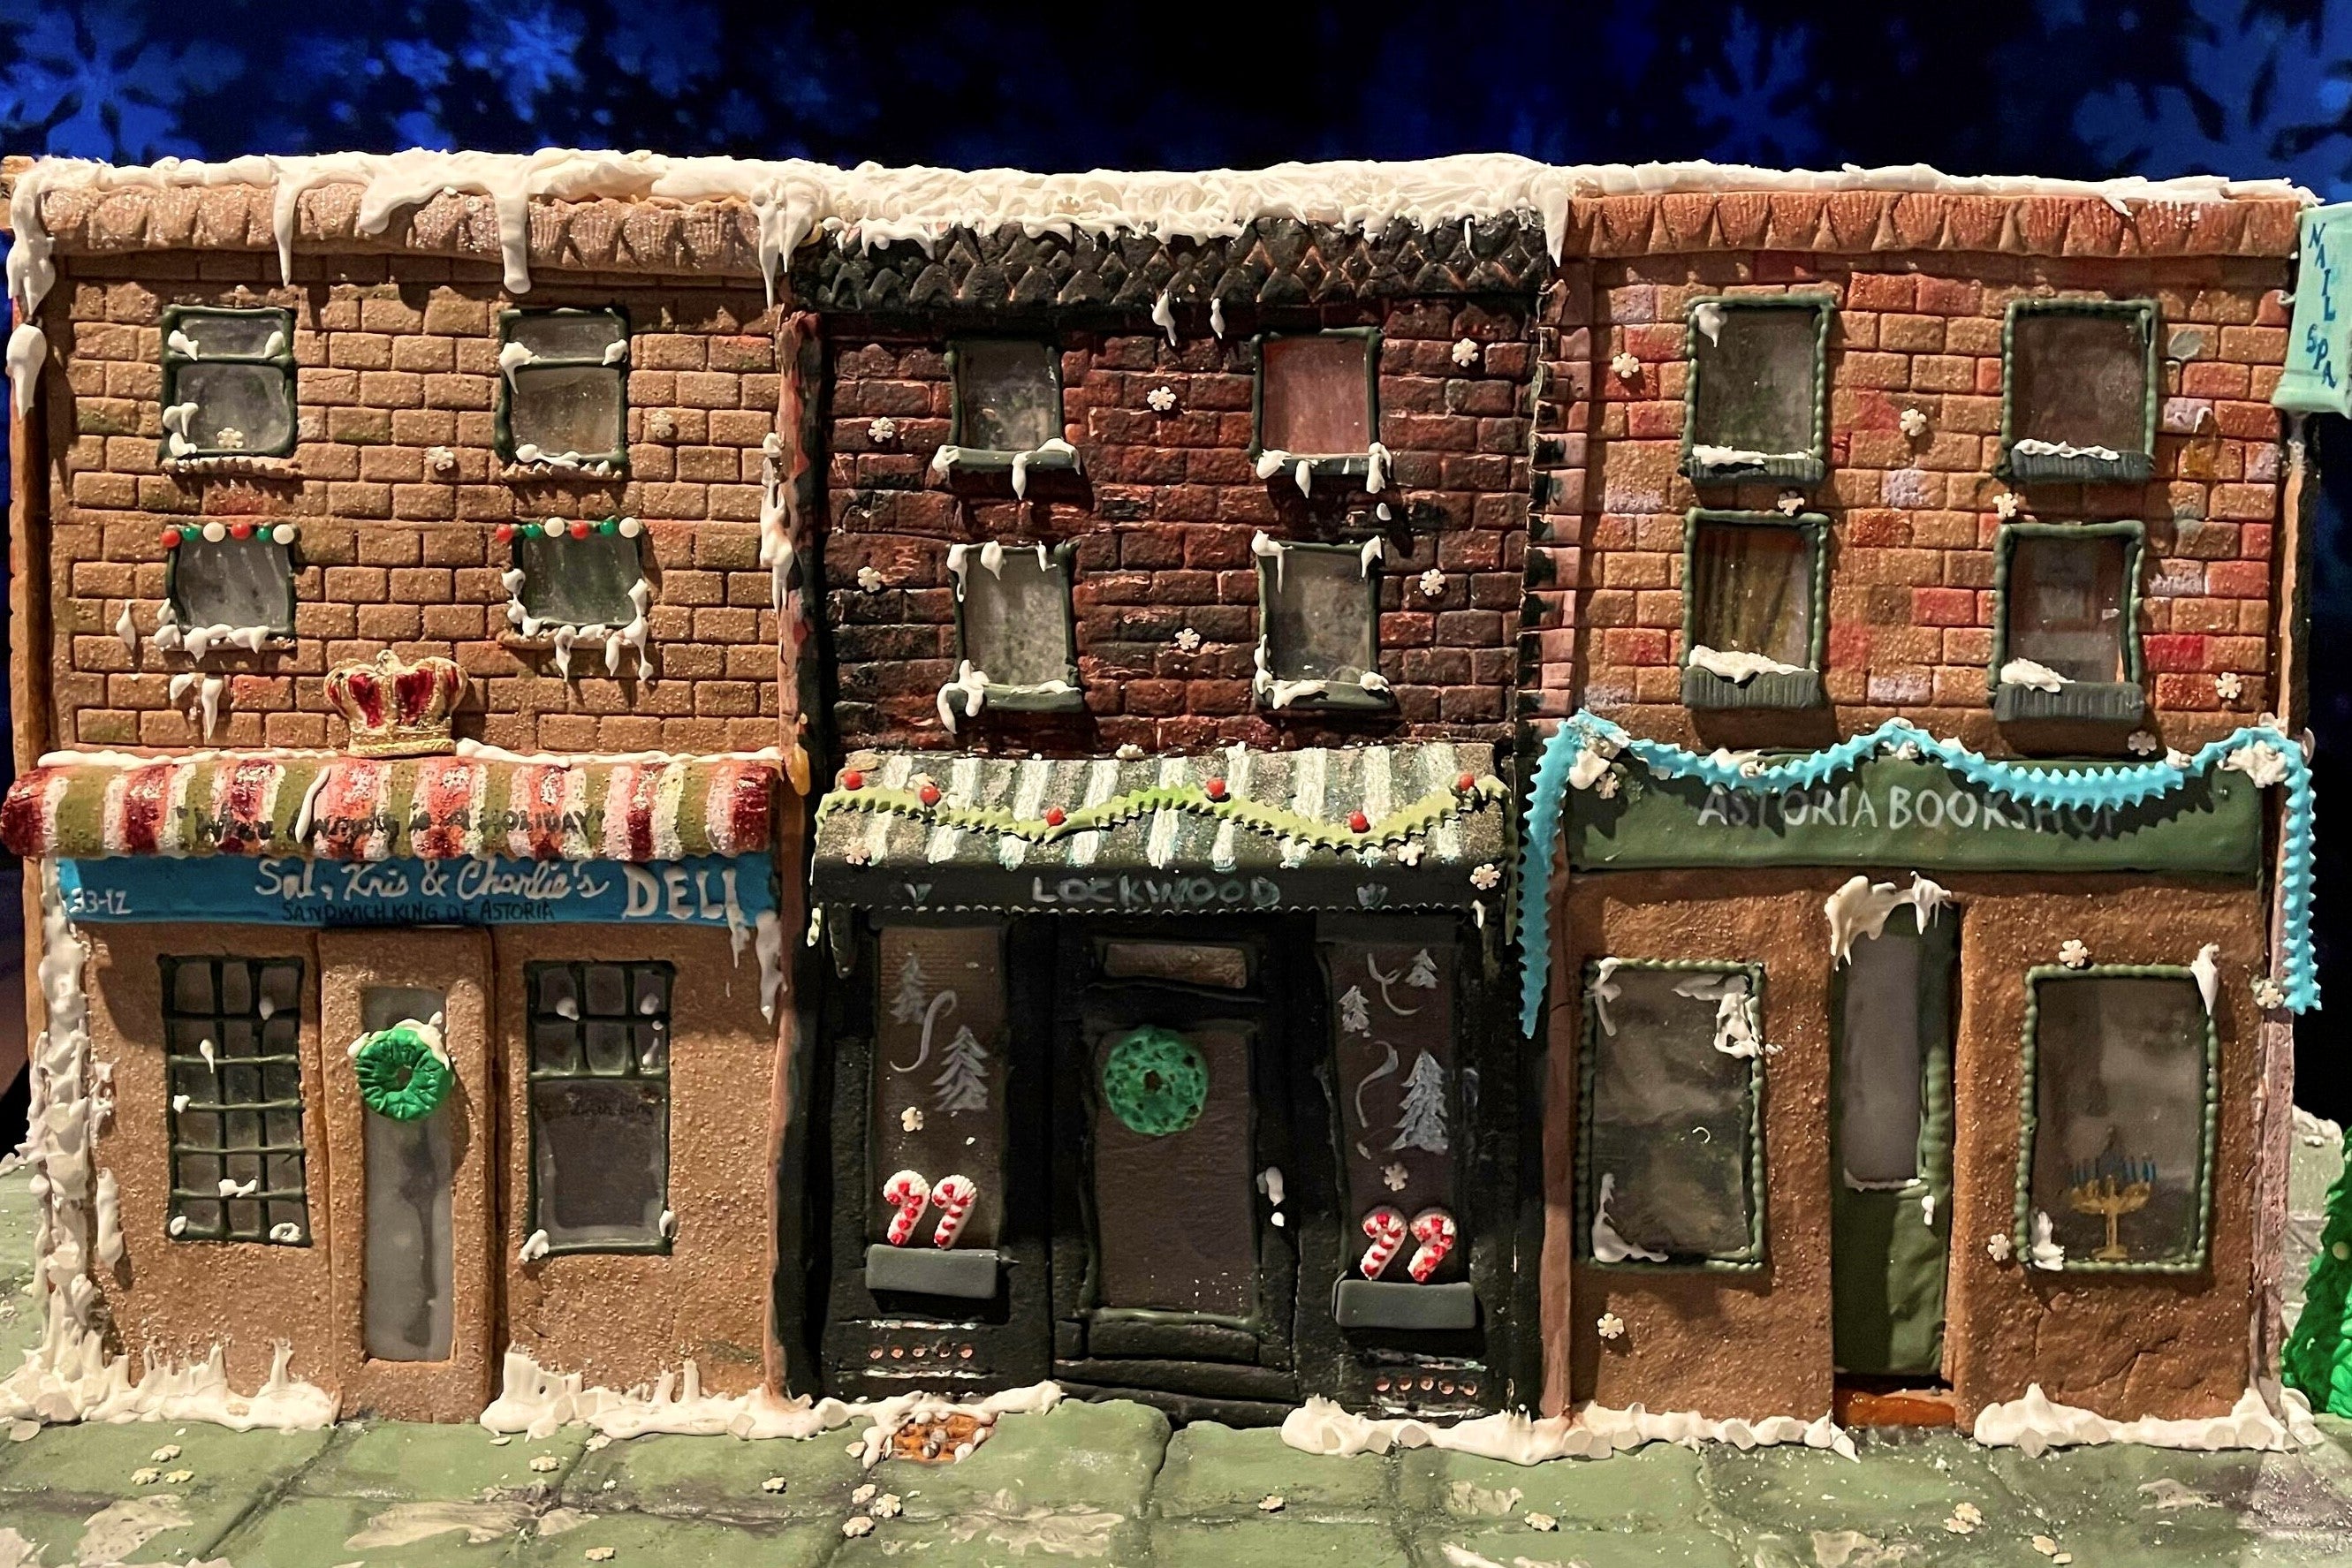 Gingerbread NYC Bake-Off Winner at Museum of City of New York